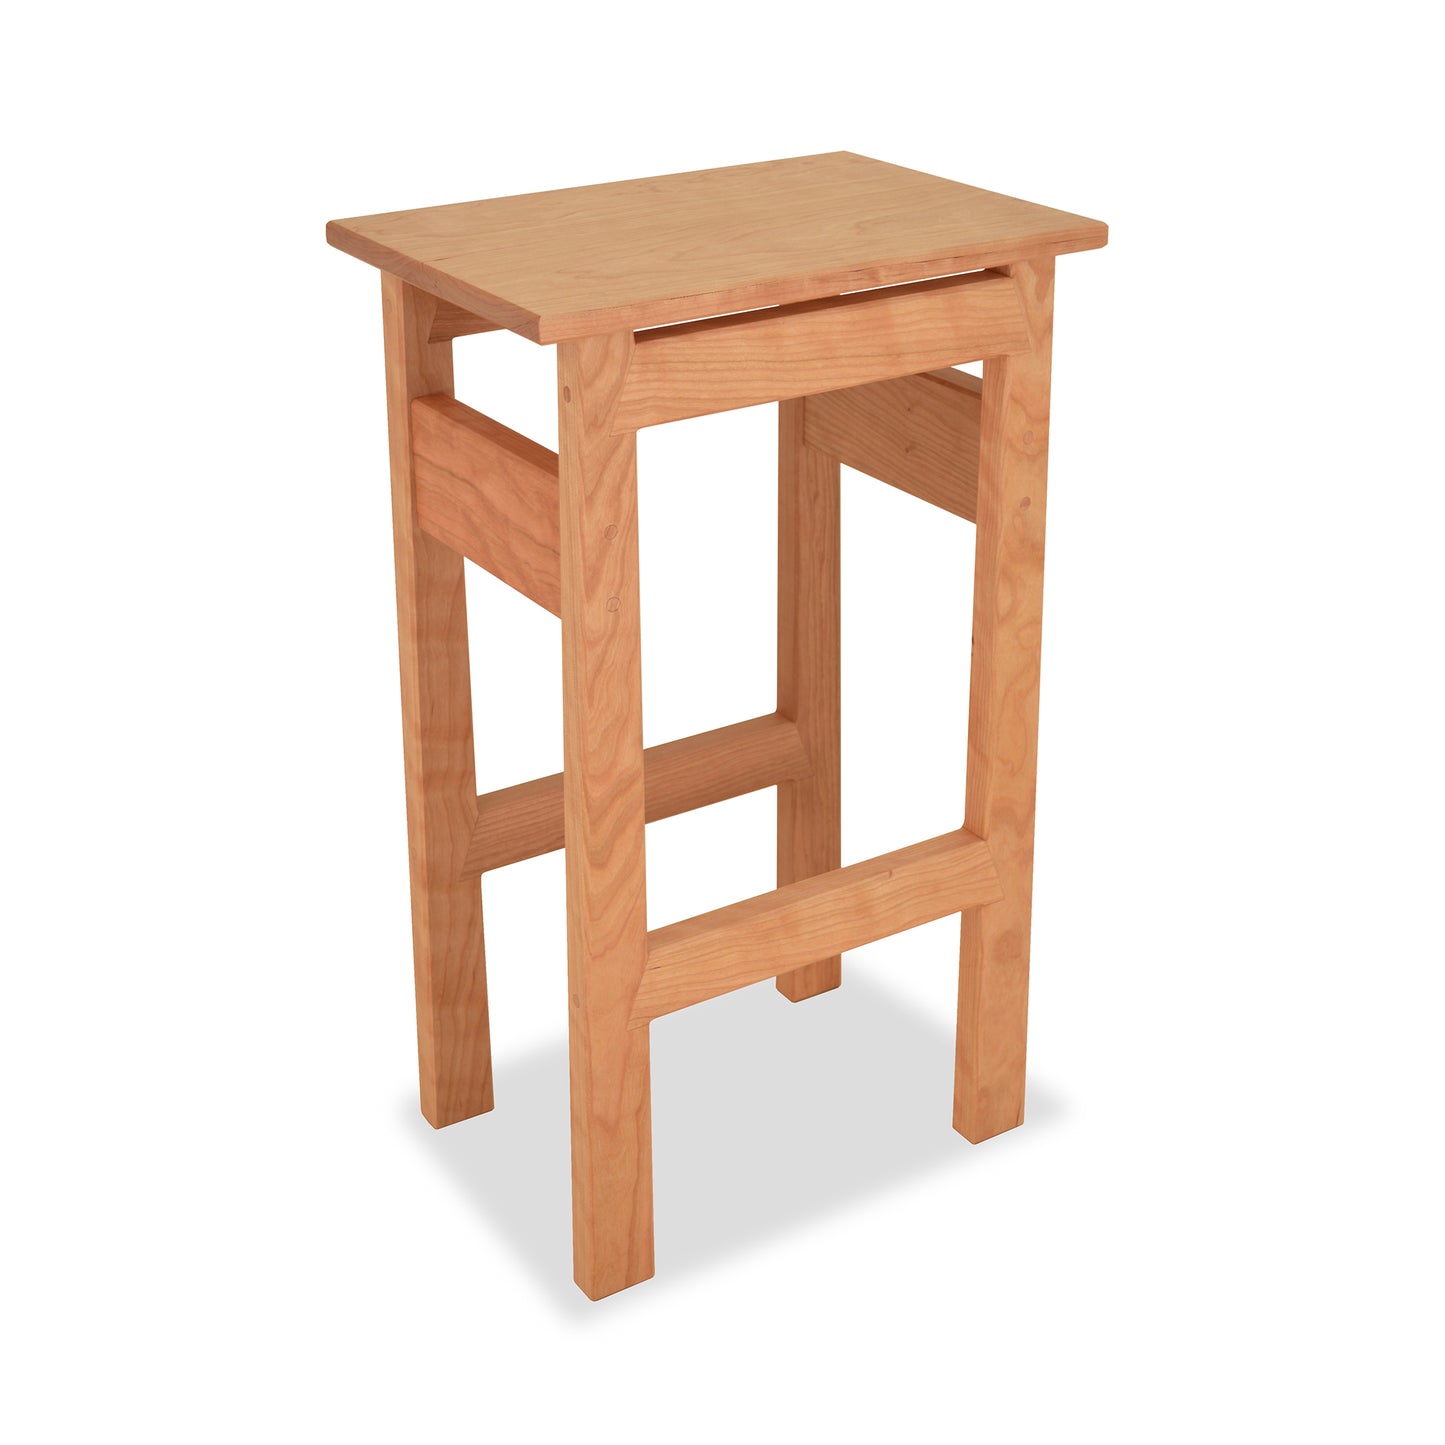 A Maple Corner Woodworks contemporary Asian stool made from eco-friendly, natural wood isolated on a white background.